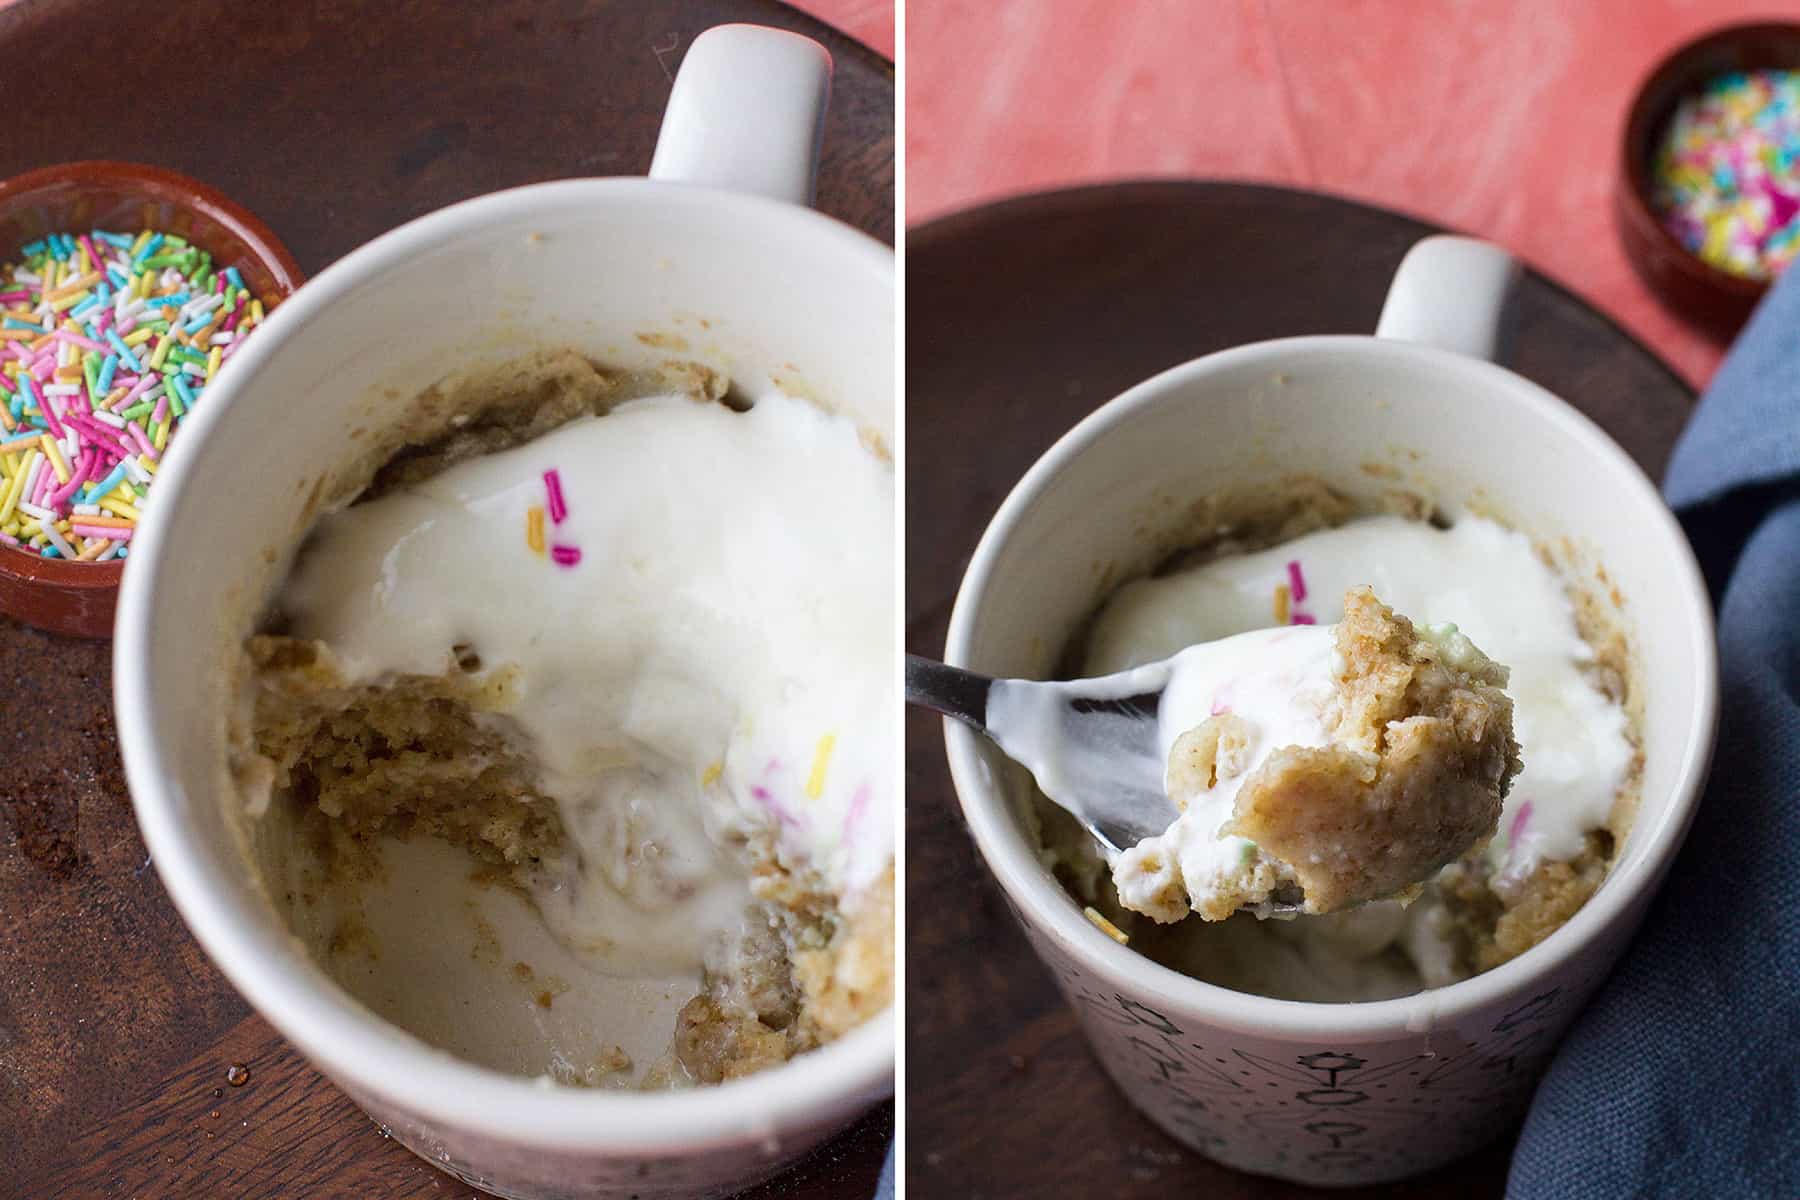 Two images to show the texture of the funfetti vanilla cake.